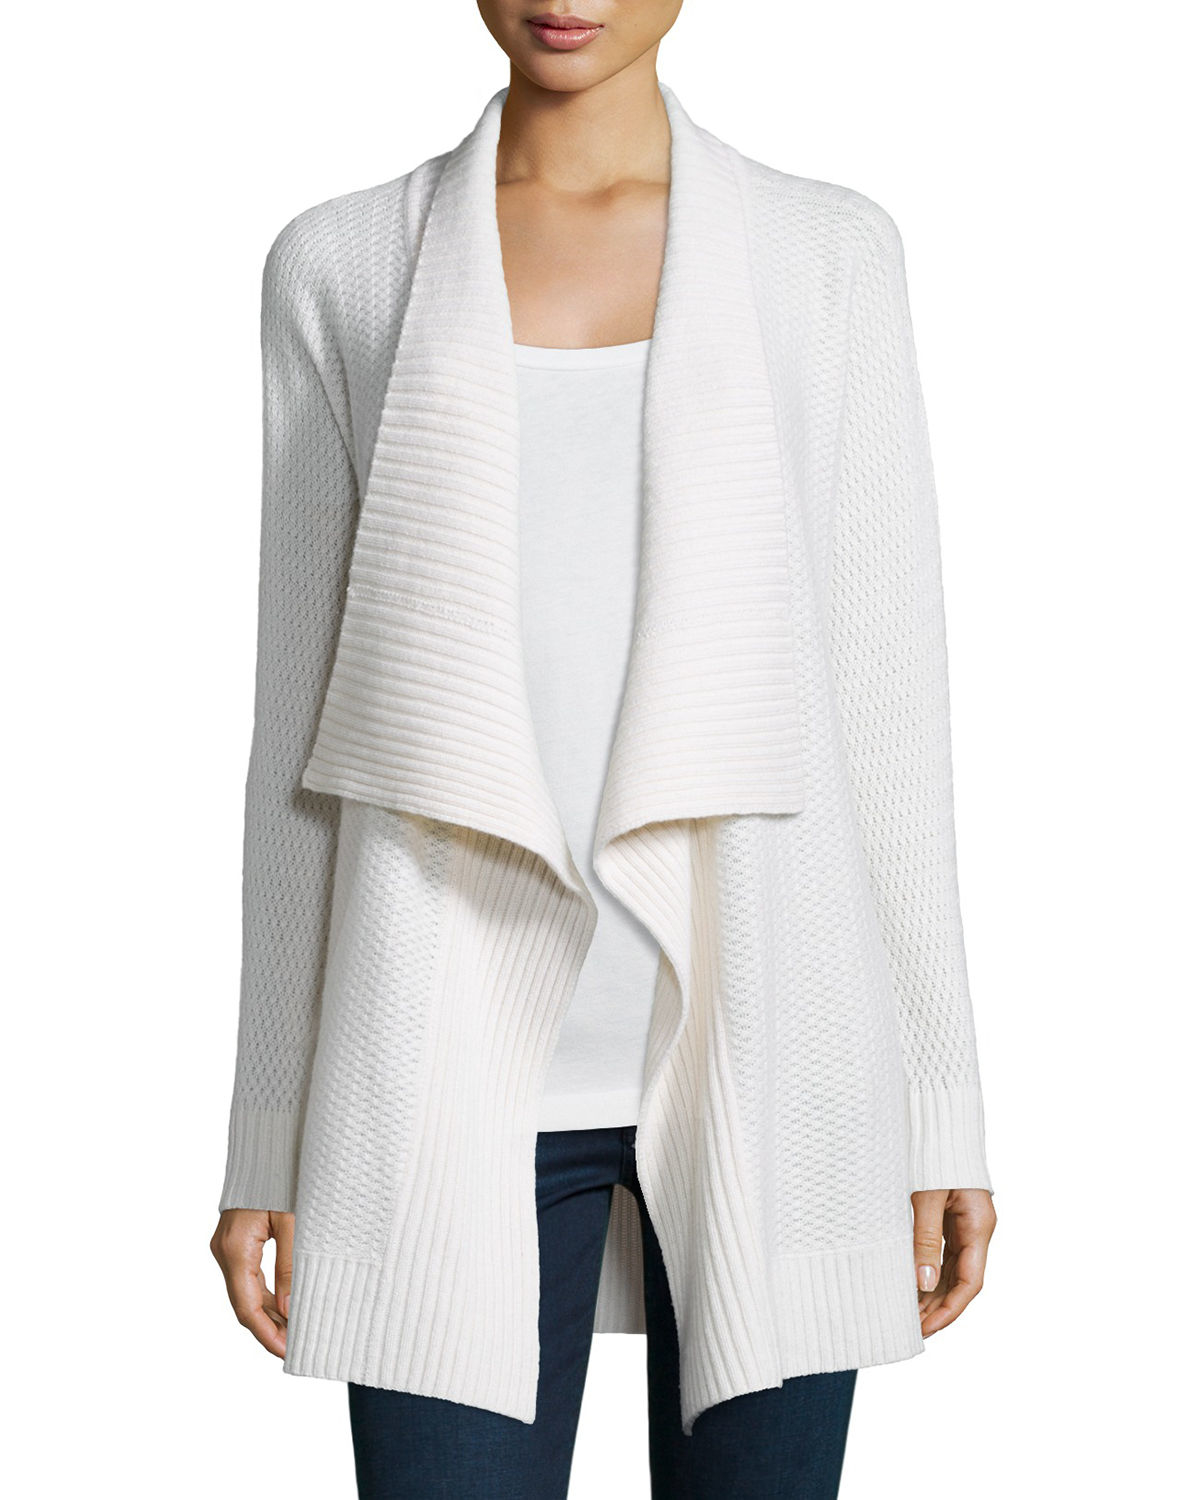 Lyst - Neiman marcus Mixed-stitch Draped Cashmere Cardigan in White